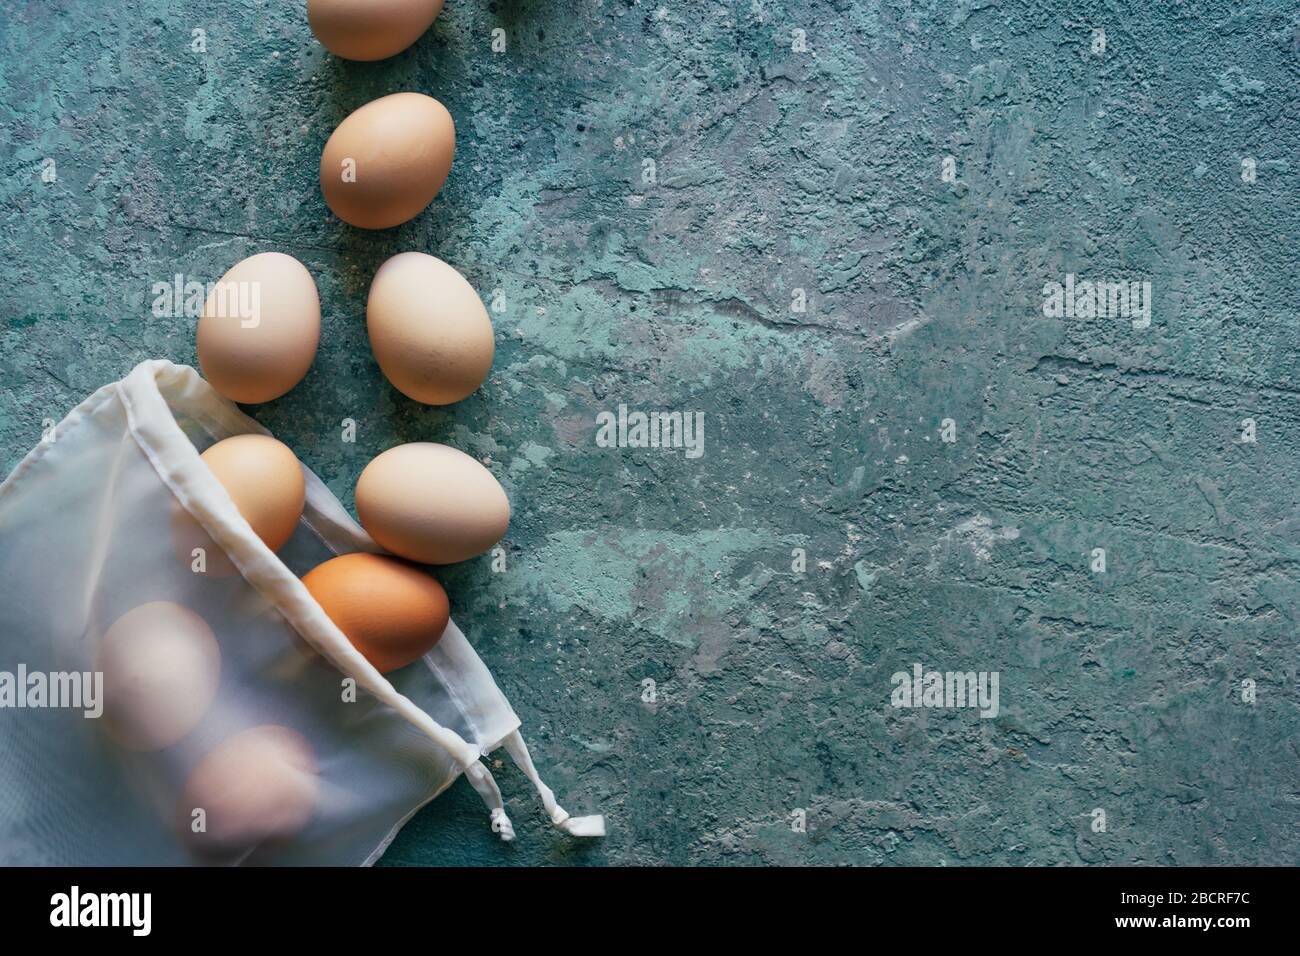 Eggs scattered from a textile white reusable shopping bag. Stock Photo